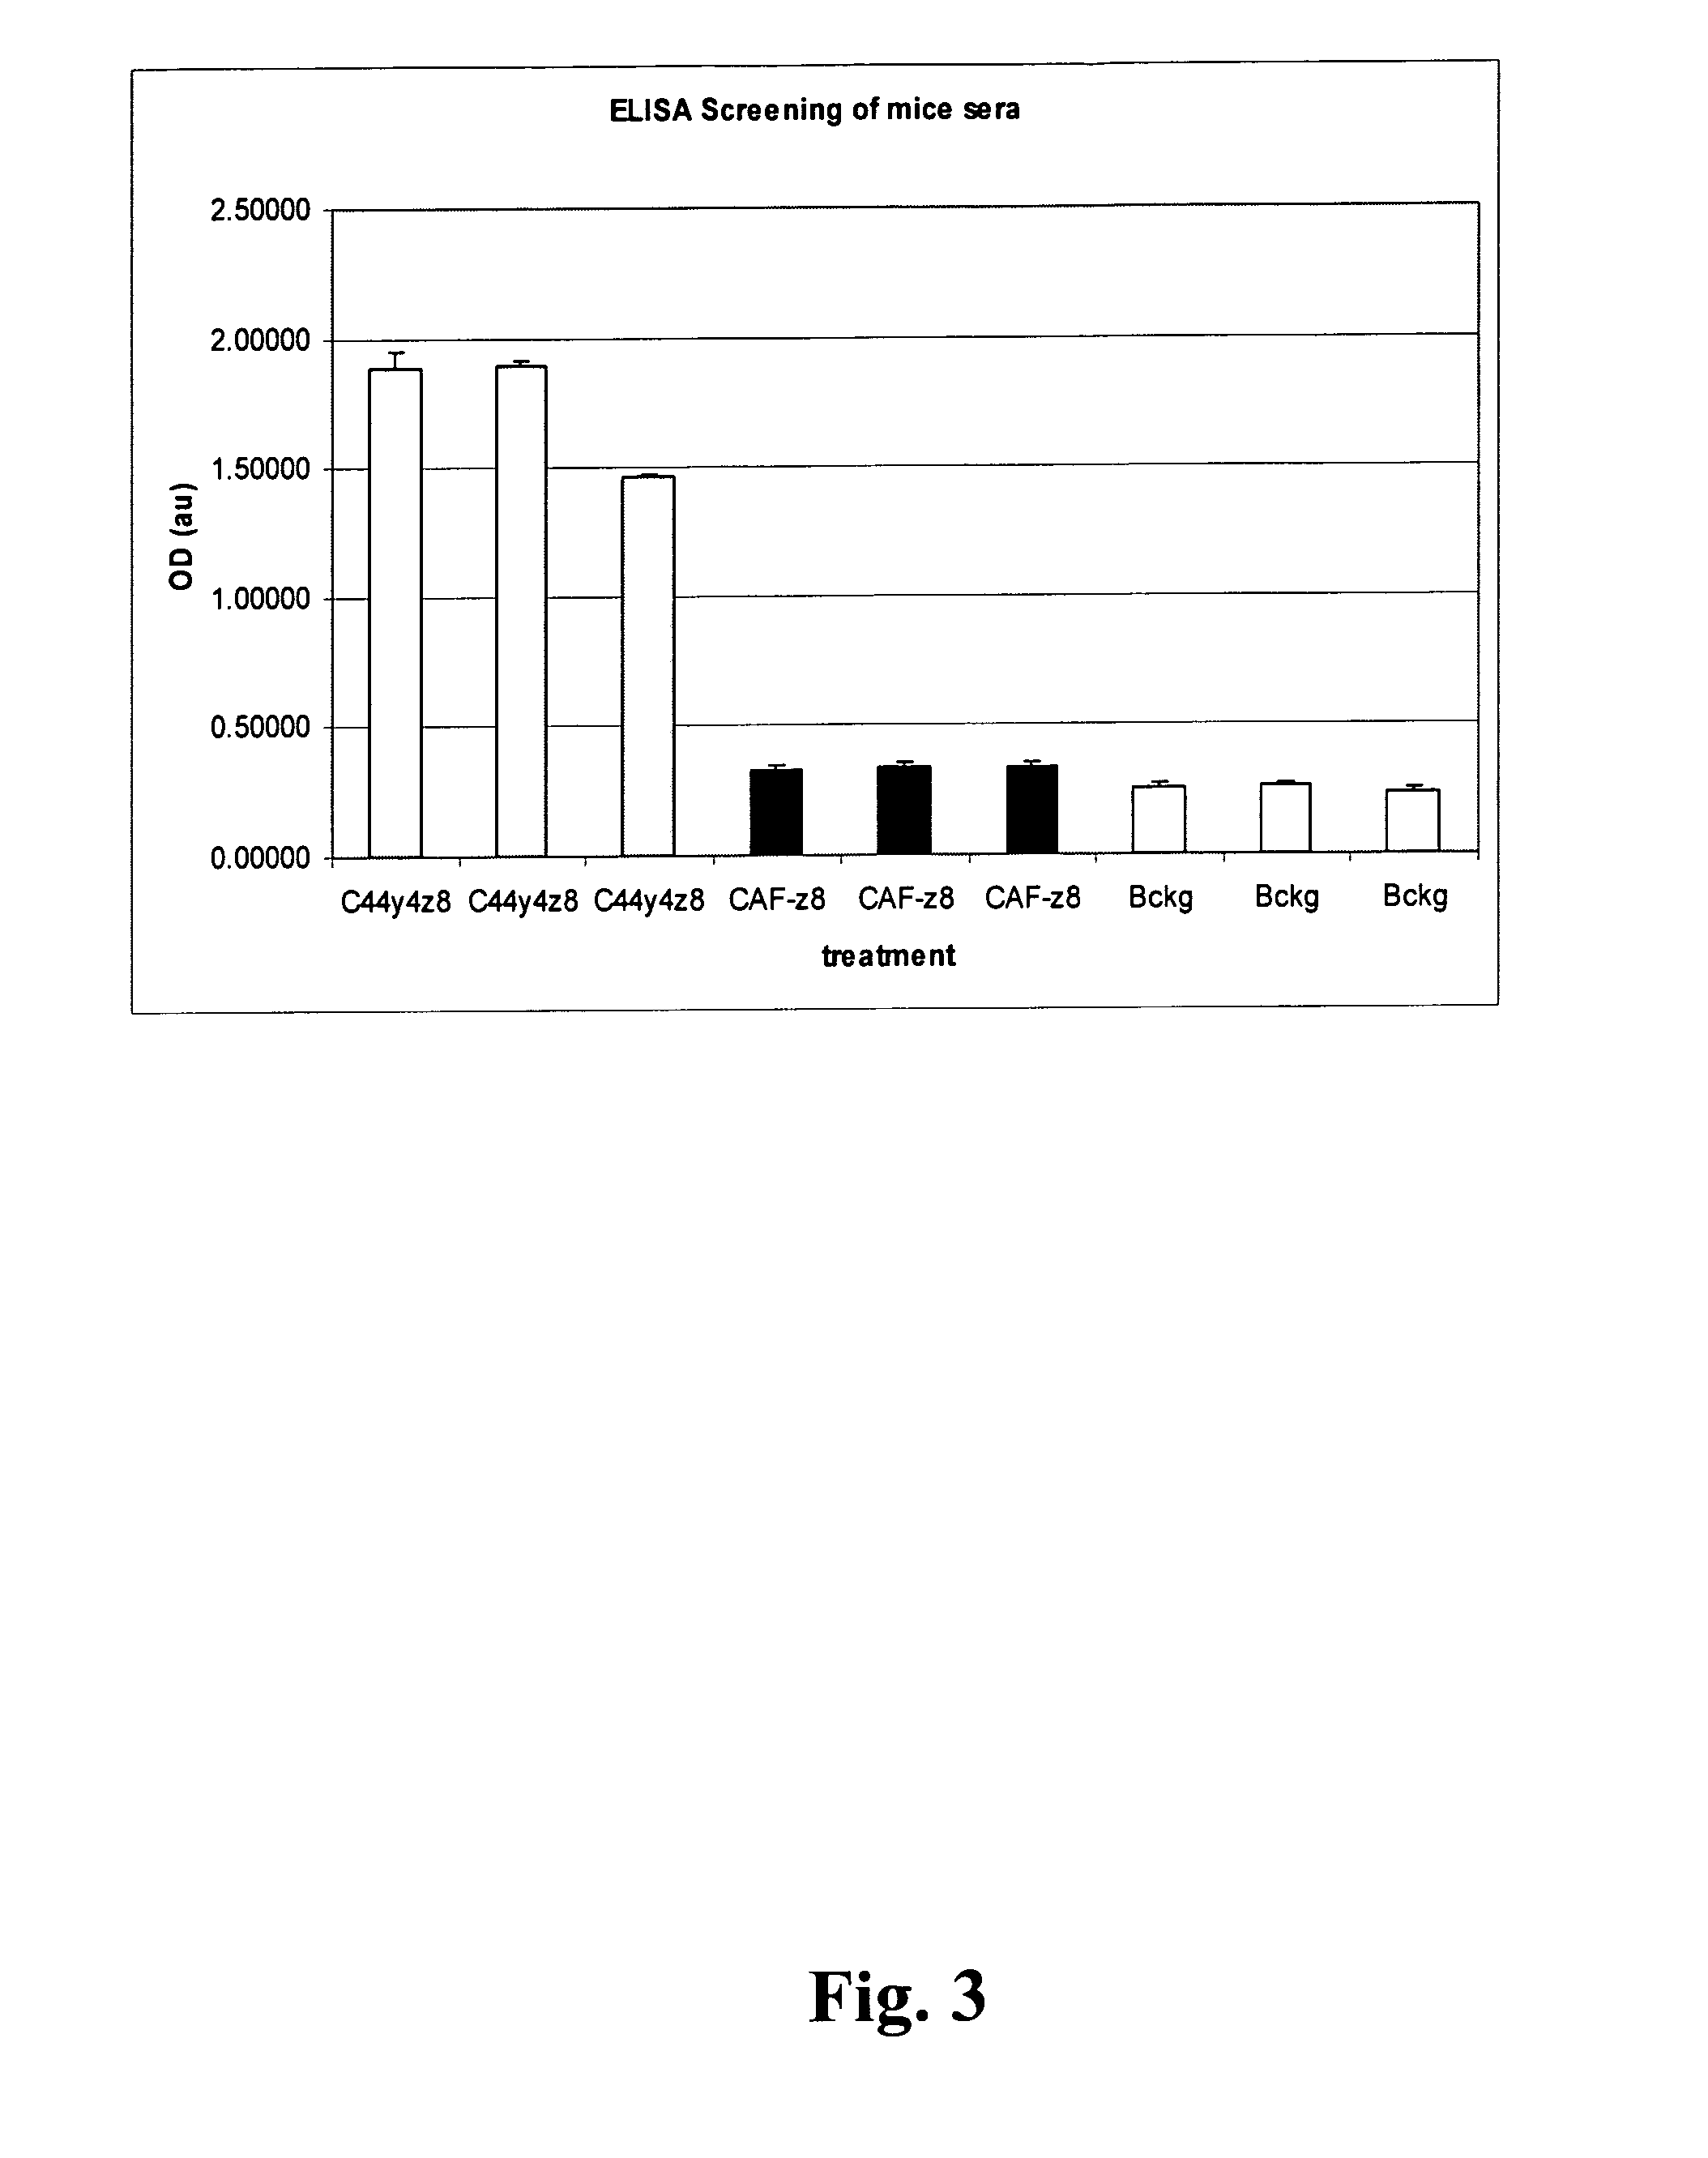 Method for the production of hybridoma cell lines producing monoclonal antibodies capable to specifically binding to a human c44-fragment of agrin